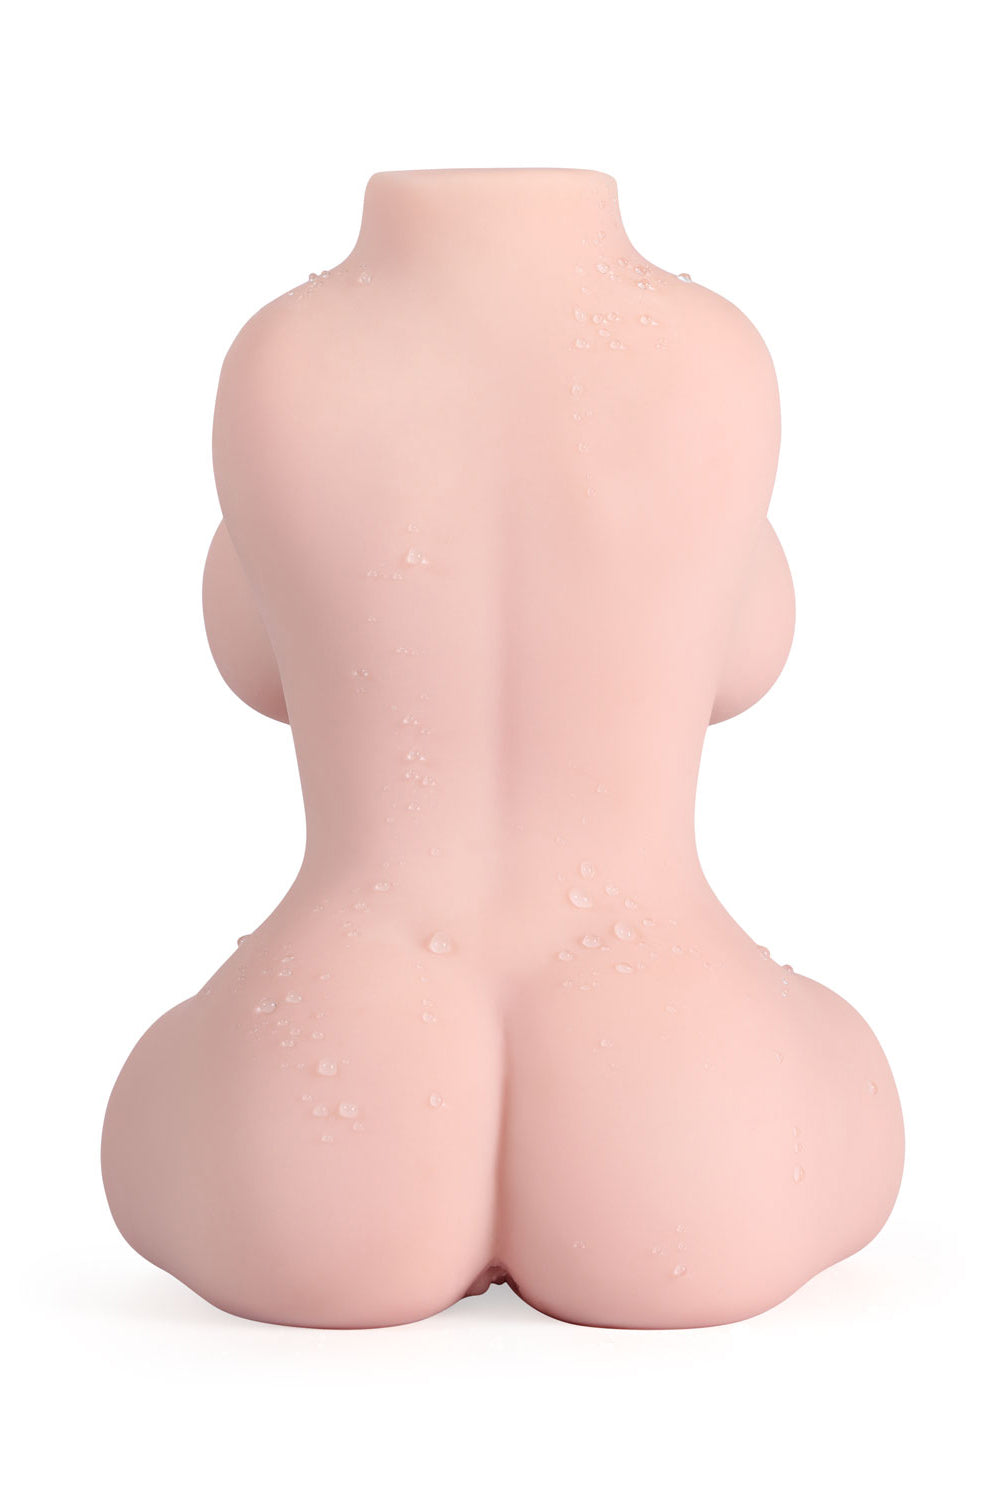 US Stock - TPE 5.5 lbs Realistic Cheap TPE Sex Doll Torso For Man